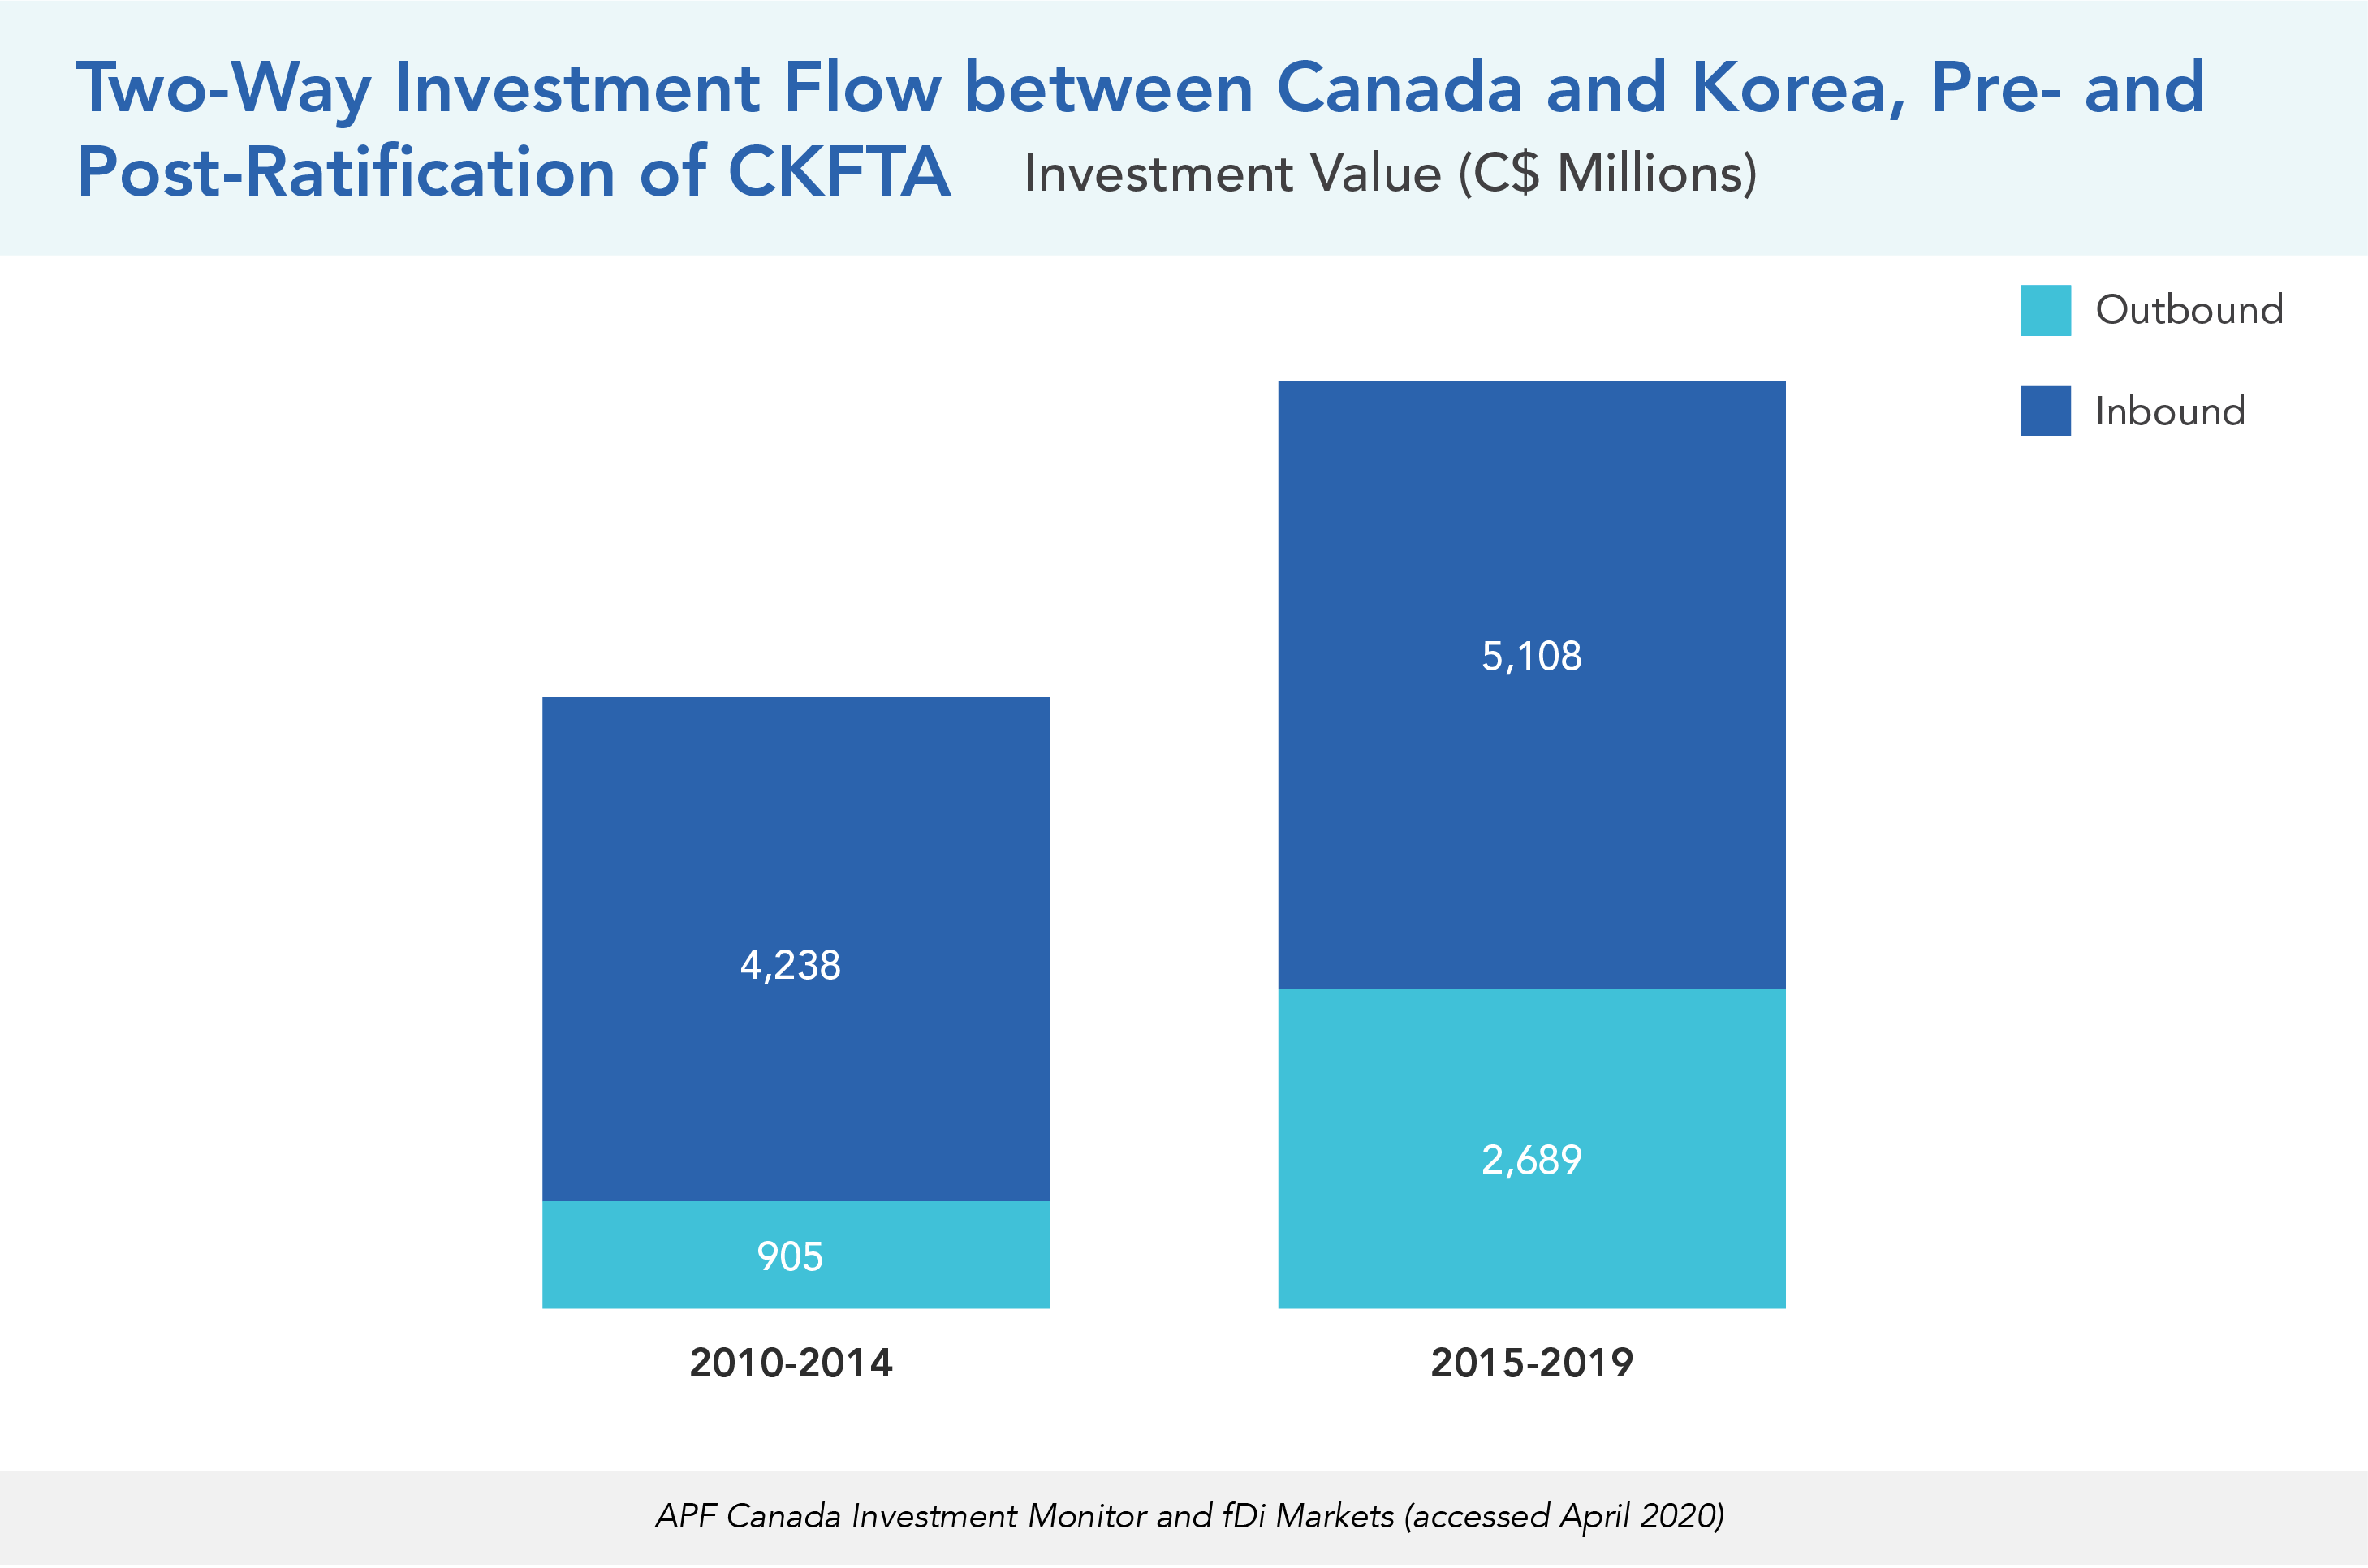 Two-Way Investment Flow between Canada and Korea, Pre- and Post-Ratification of CKFTA